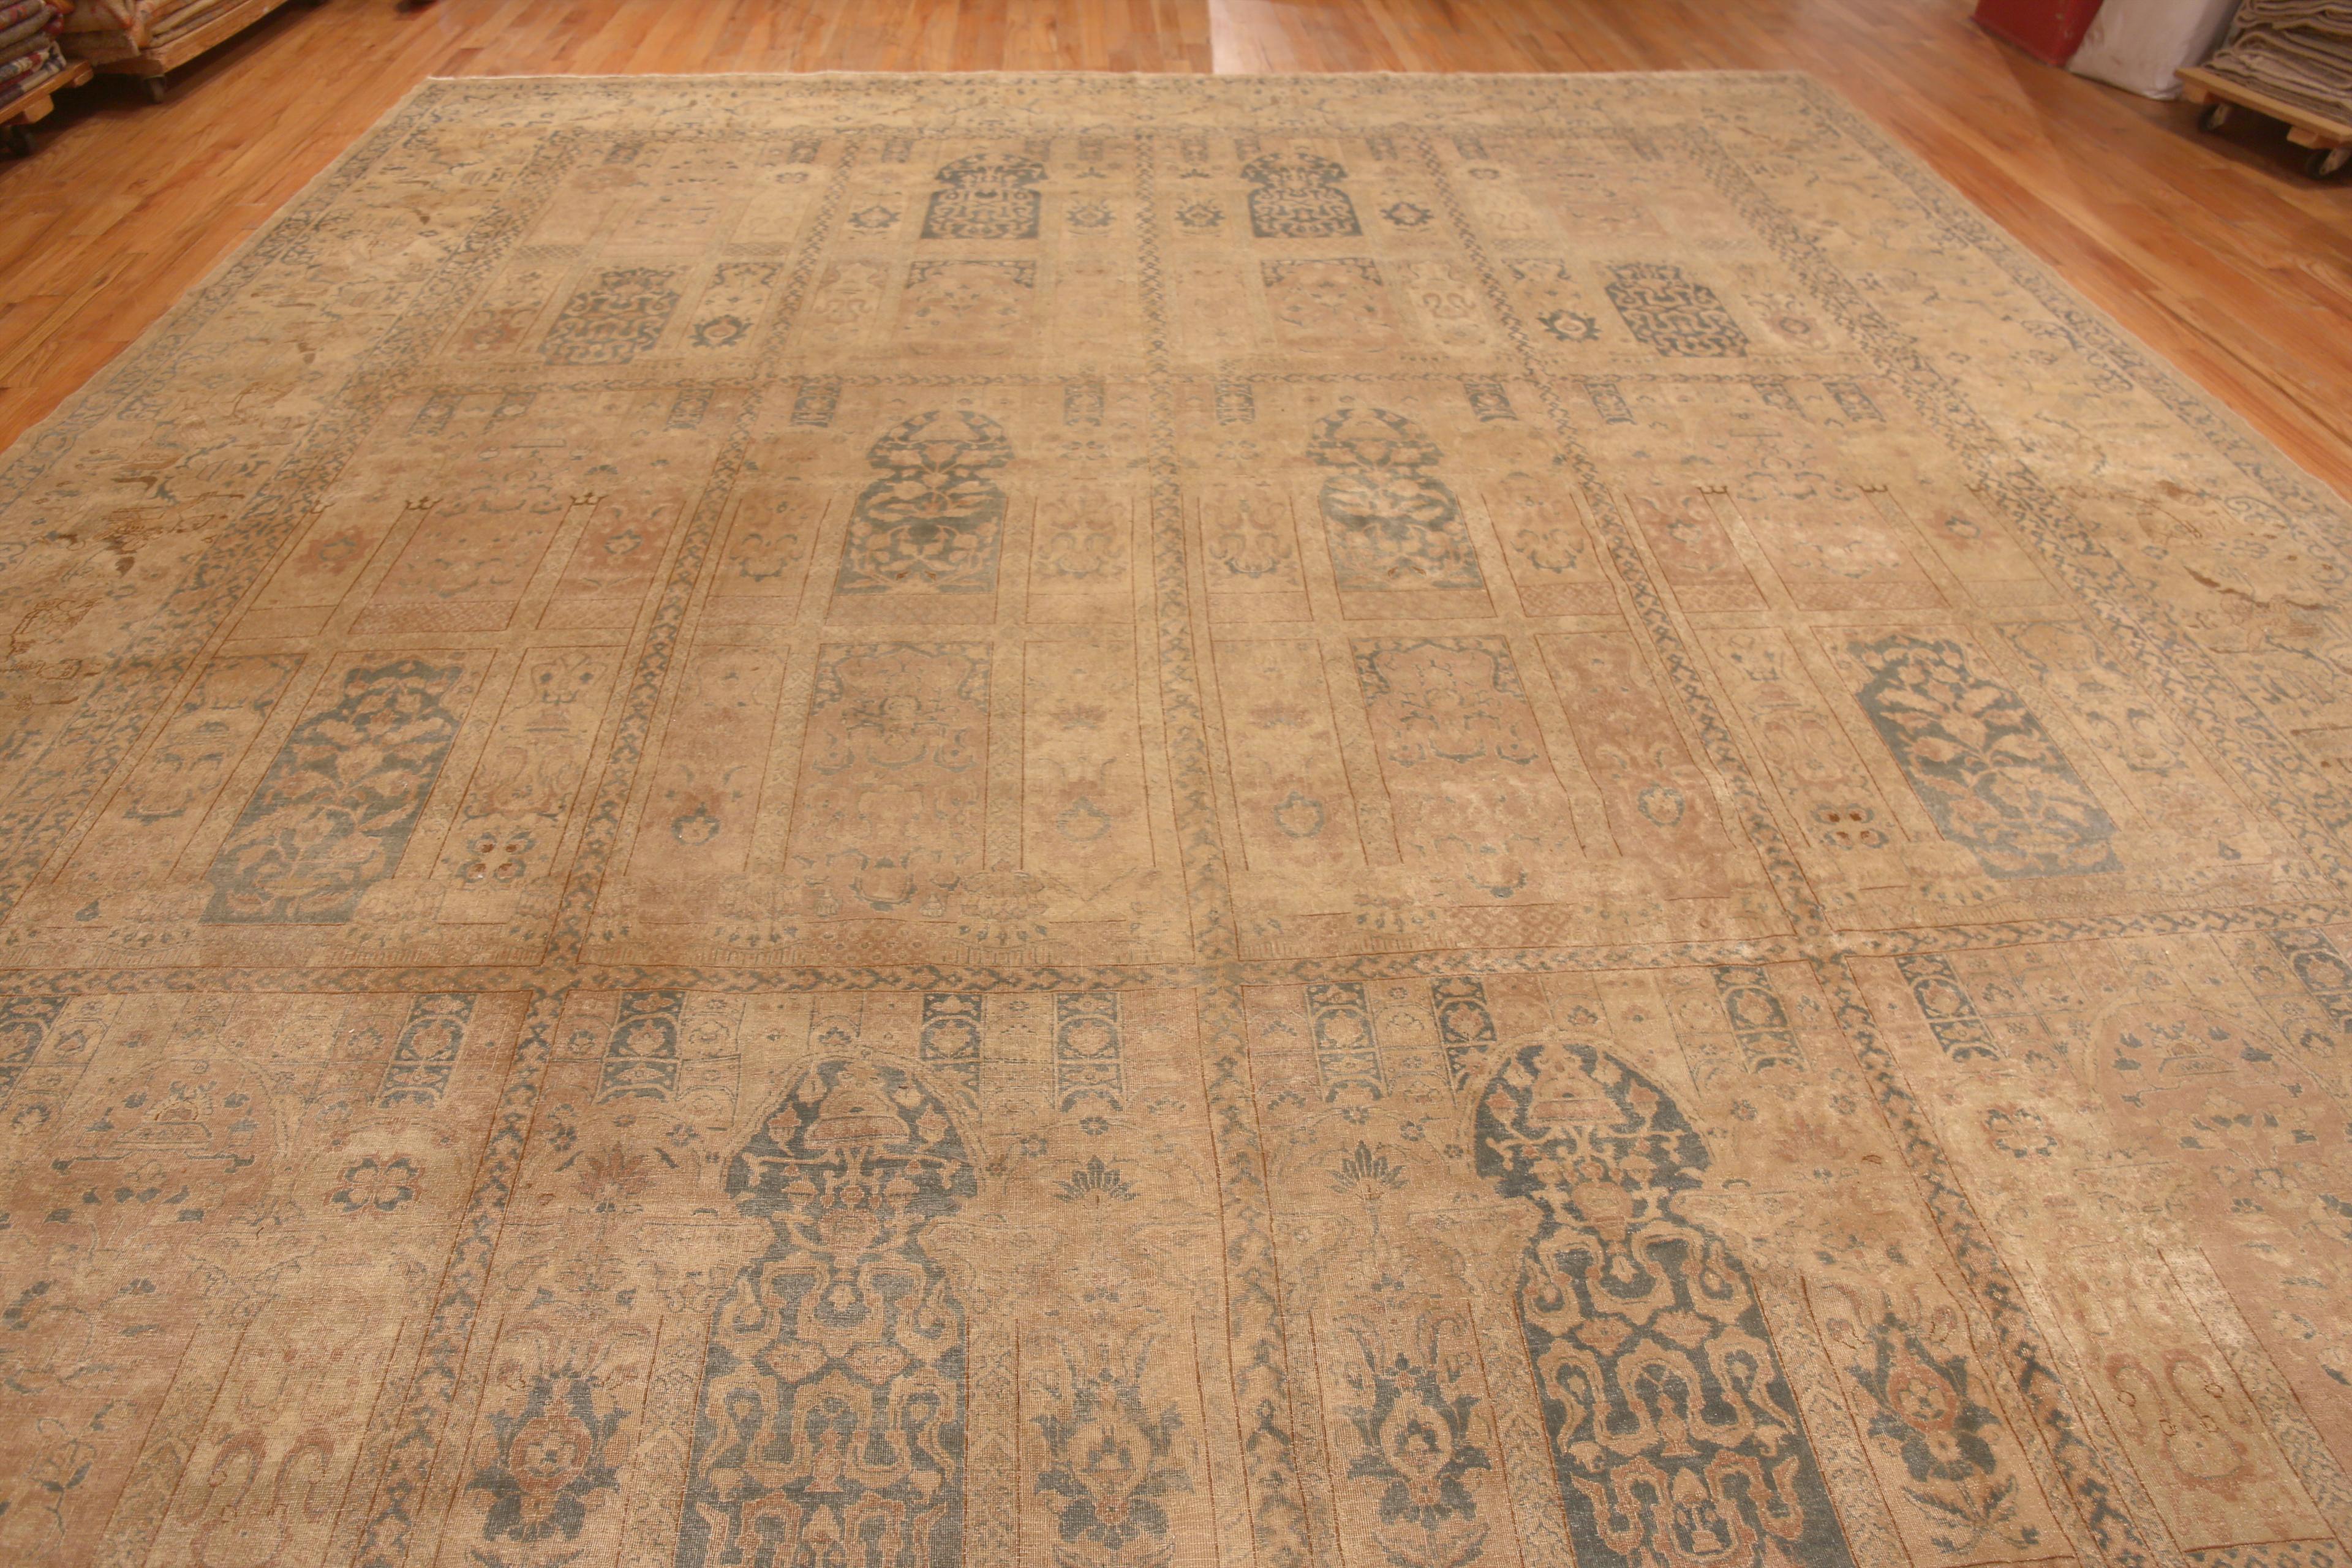 Hand-Knotted Magnificent Antique Oversized Garden Design Persian Tabriz Rug 14'4